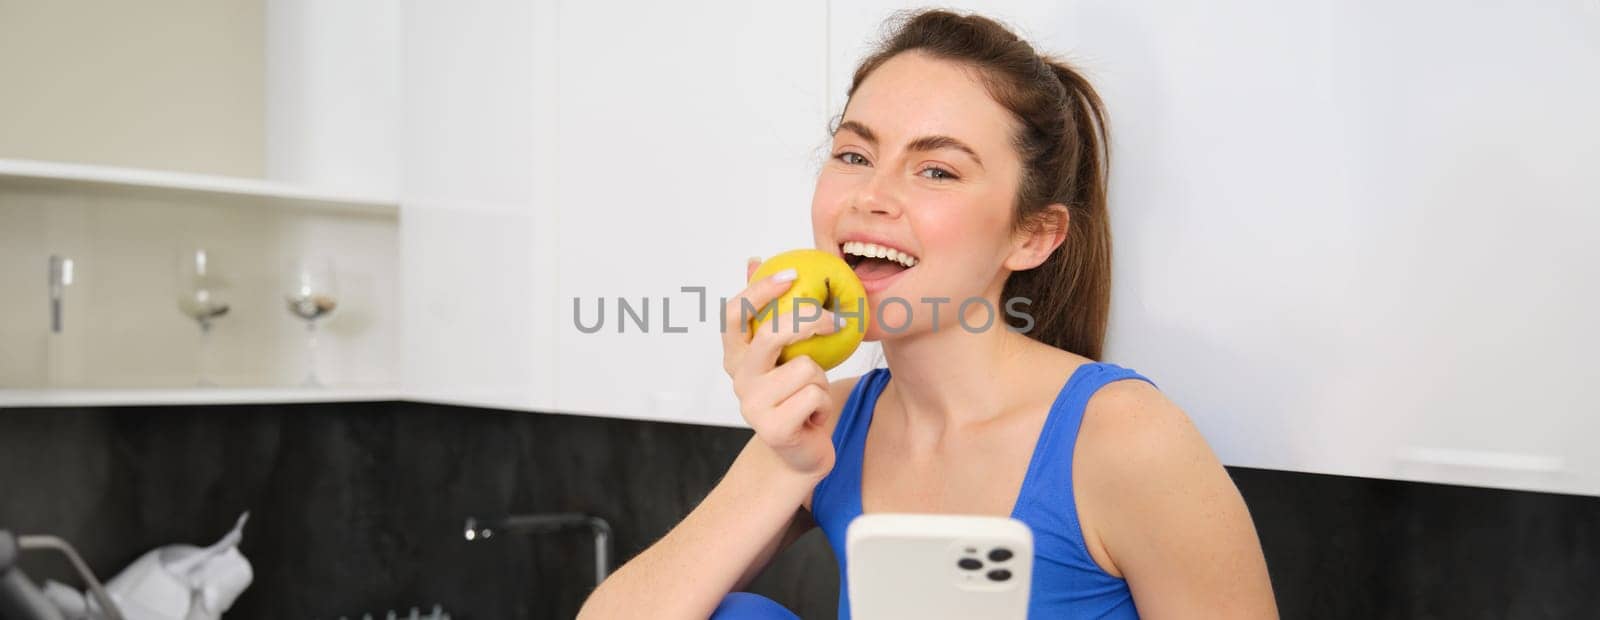 Portrait of smiling brunette girl, wearing fitness clothes, sitting in kitchen and biting an apple, eating fruit snack between workout, holding smartphone, using mobile phone app.